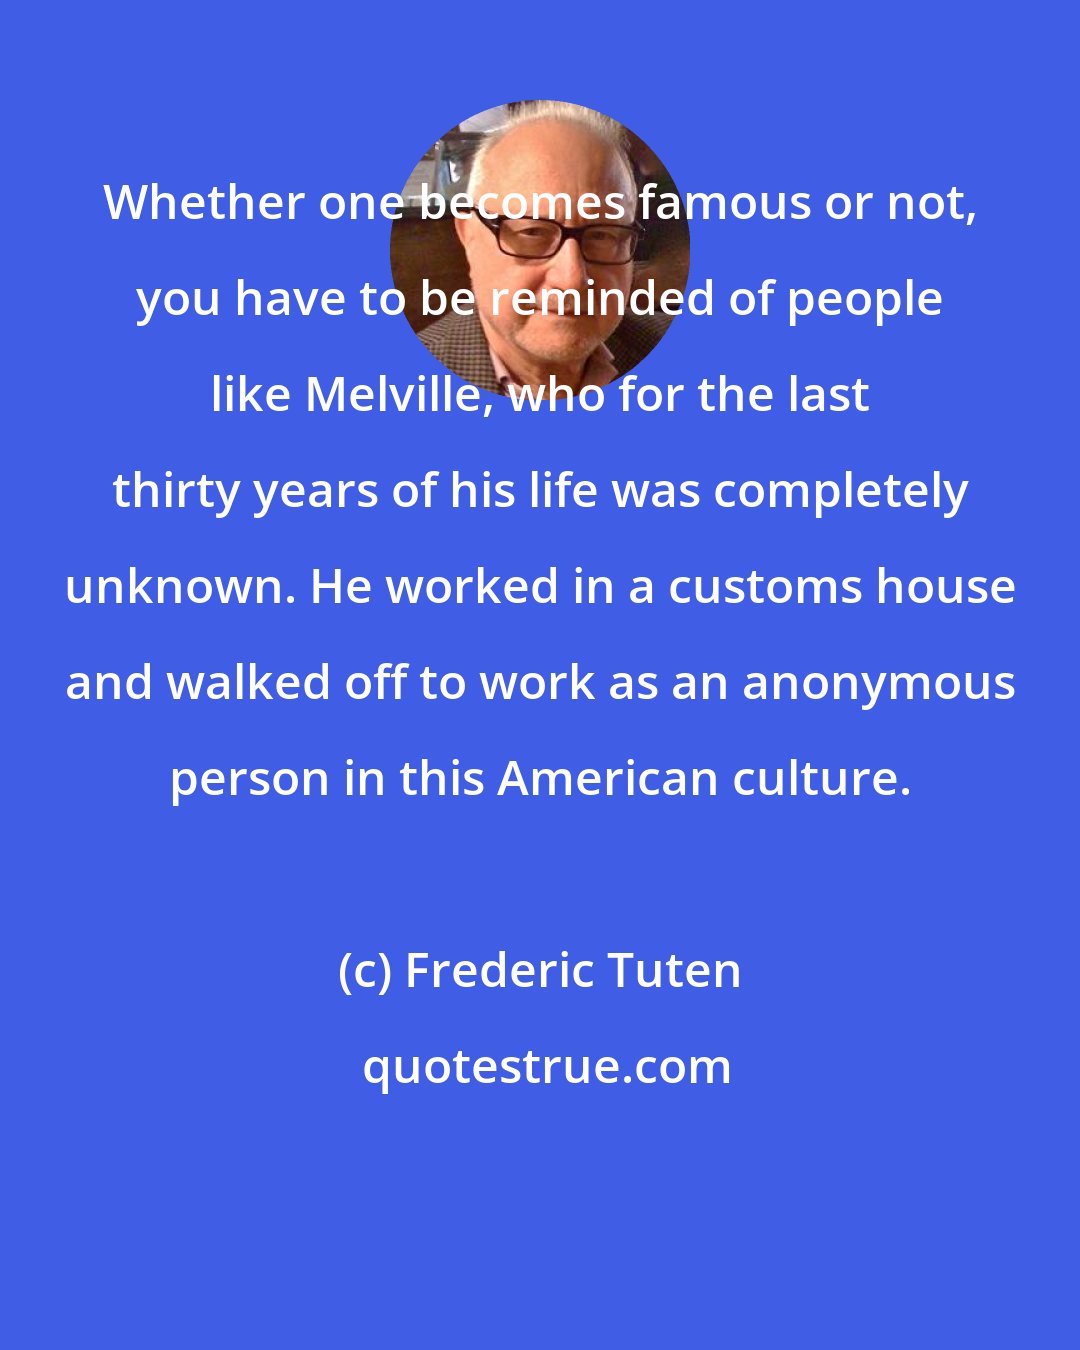 Frederic Tuten: Whether one becomes famous or not, you have to be reminded of people like Melville, who for the last thirty years of his life was completely unknown. He worked in a customs house and walked off to work as an anonymous person in this American culture.